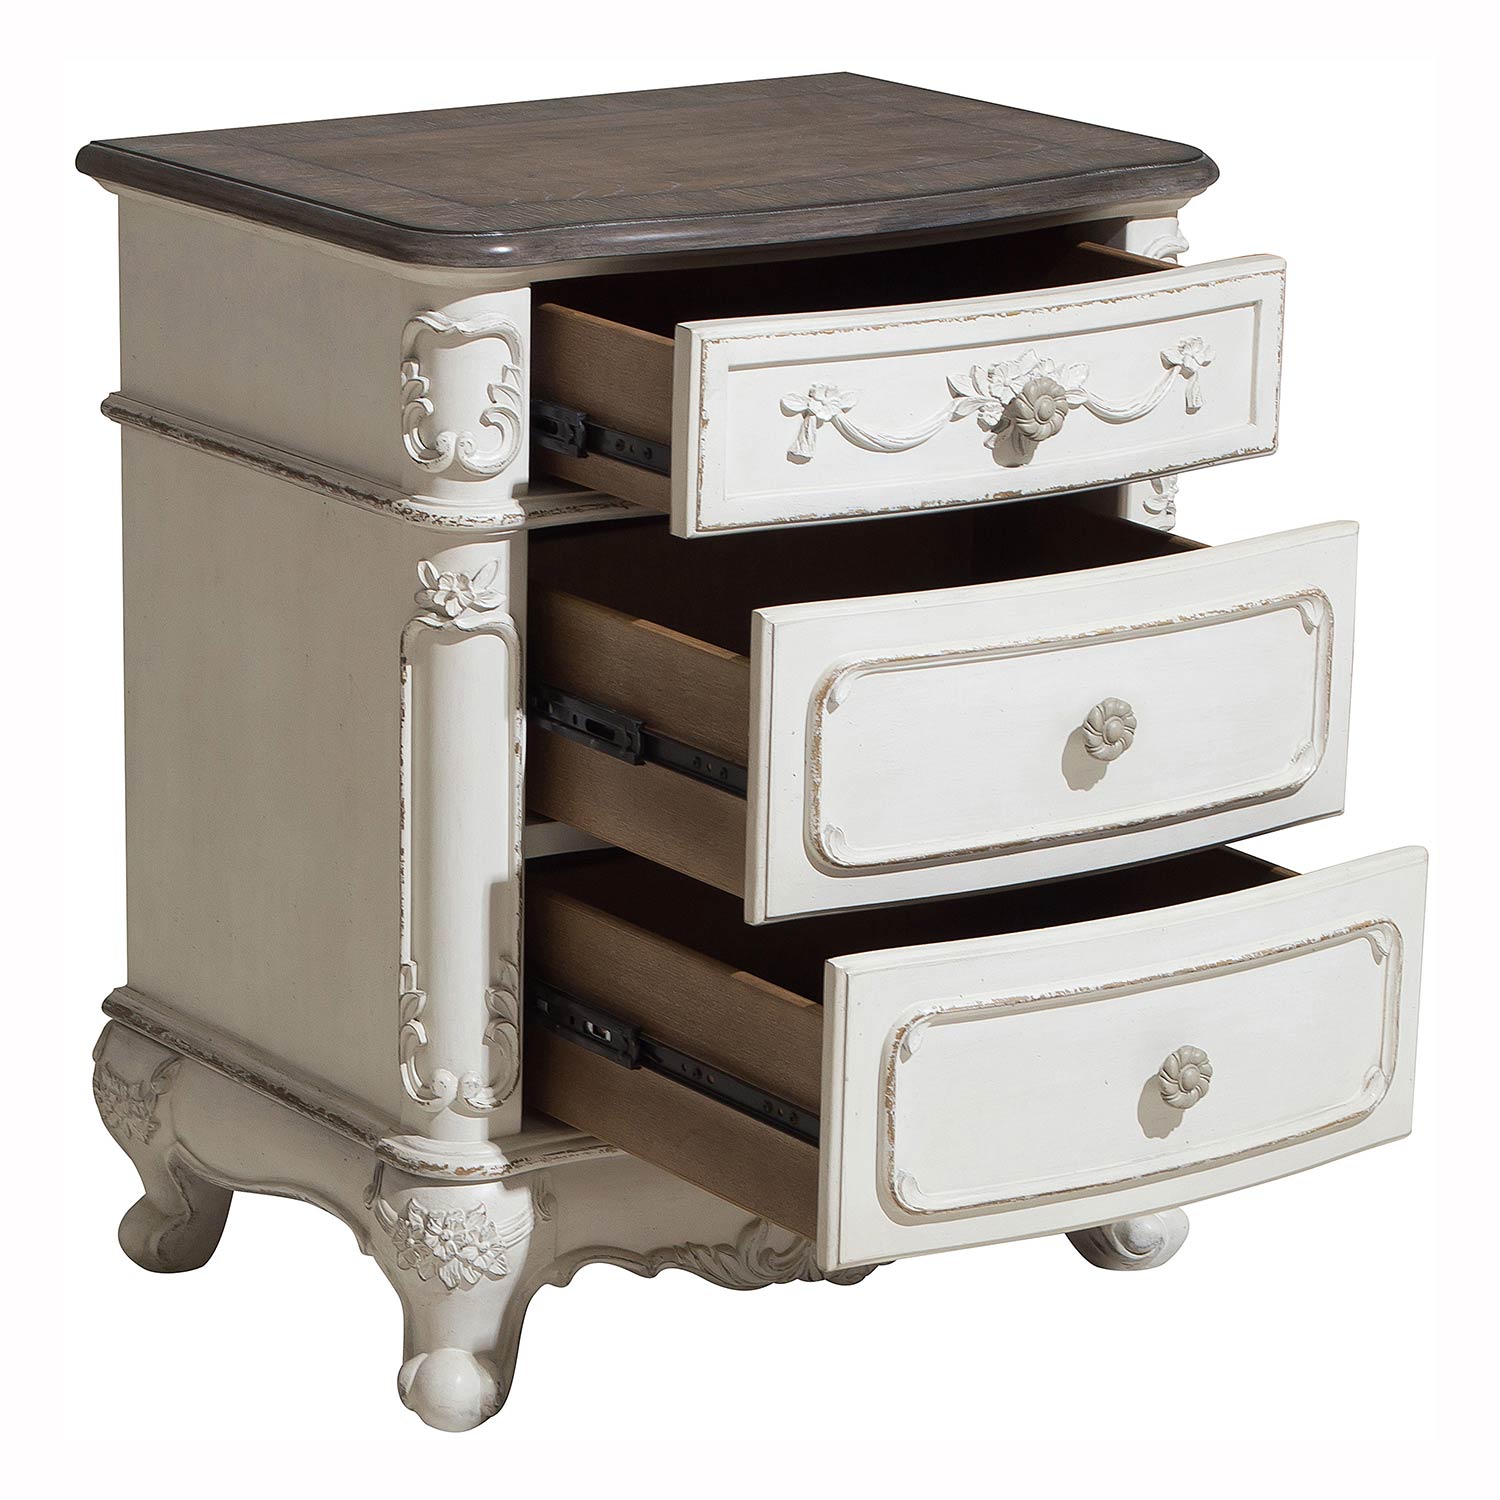 Homelegance Cinderella Night Stand - Antique White with Gray Rub-Through